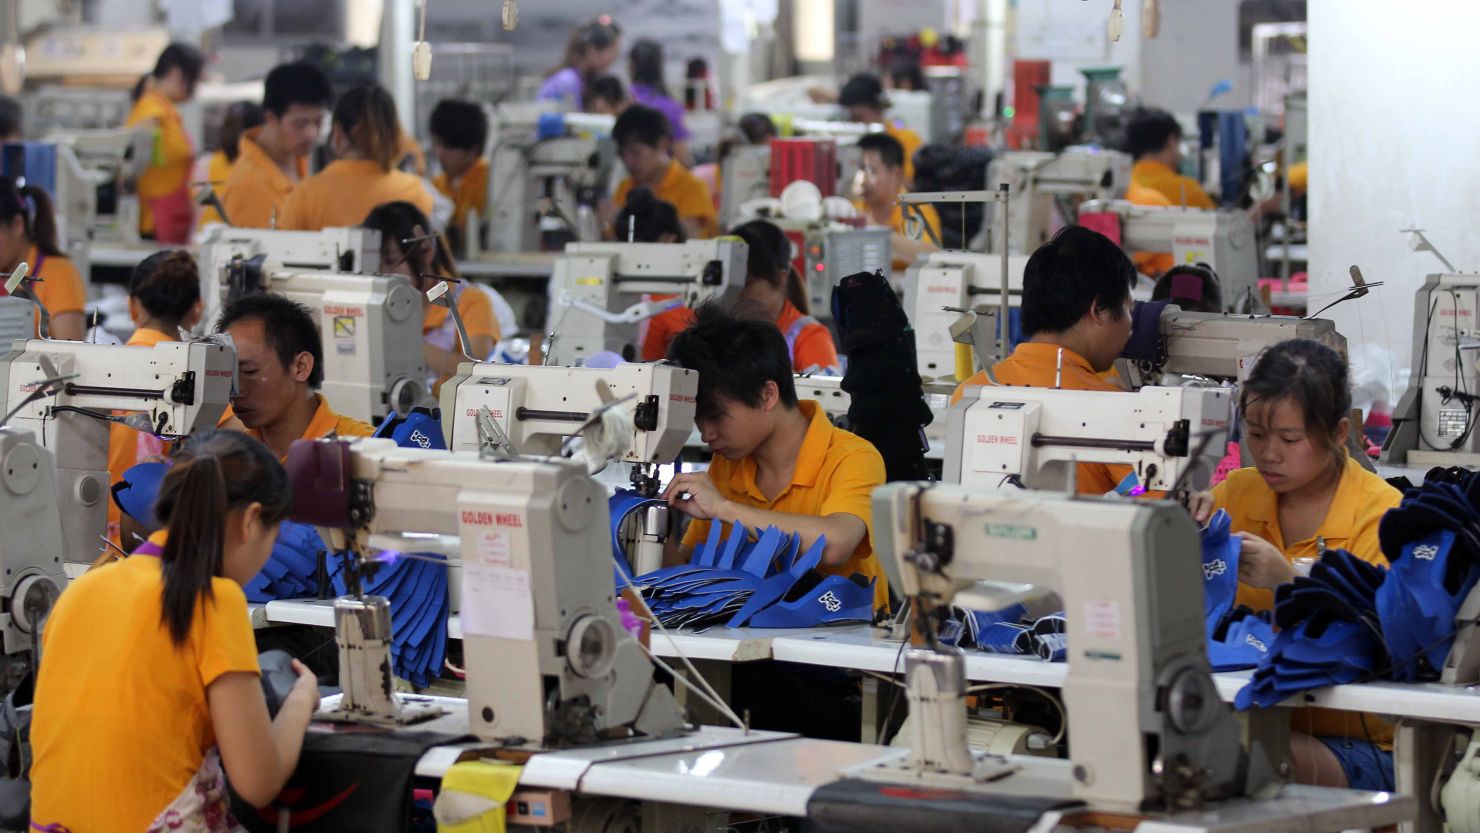 All in a day's work: Laborers sew away in a typical shoe factory in southern China's Fujian province.